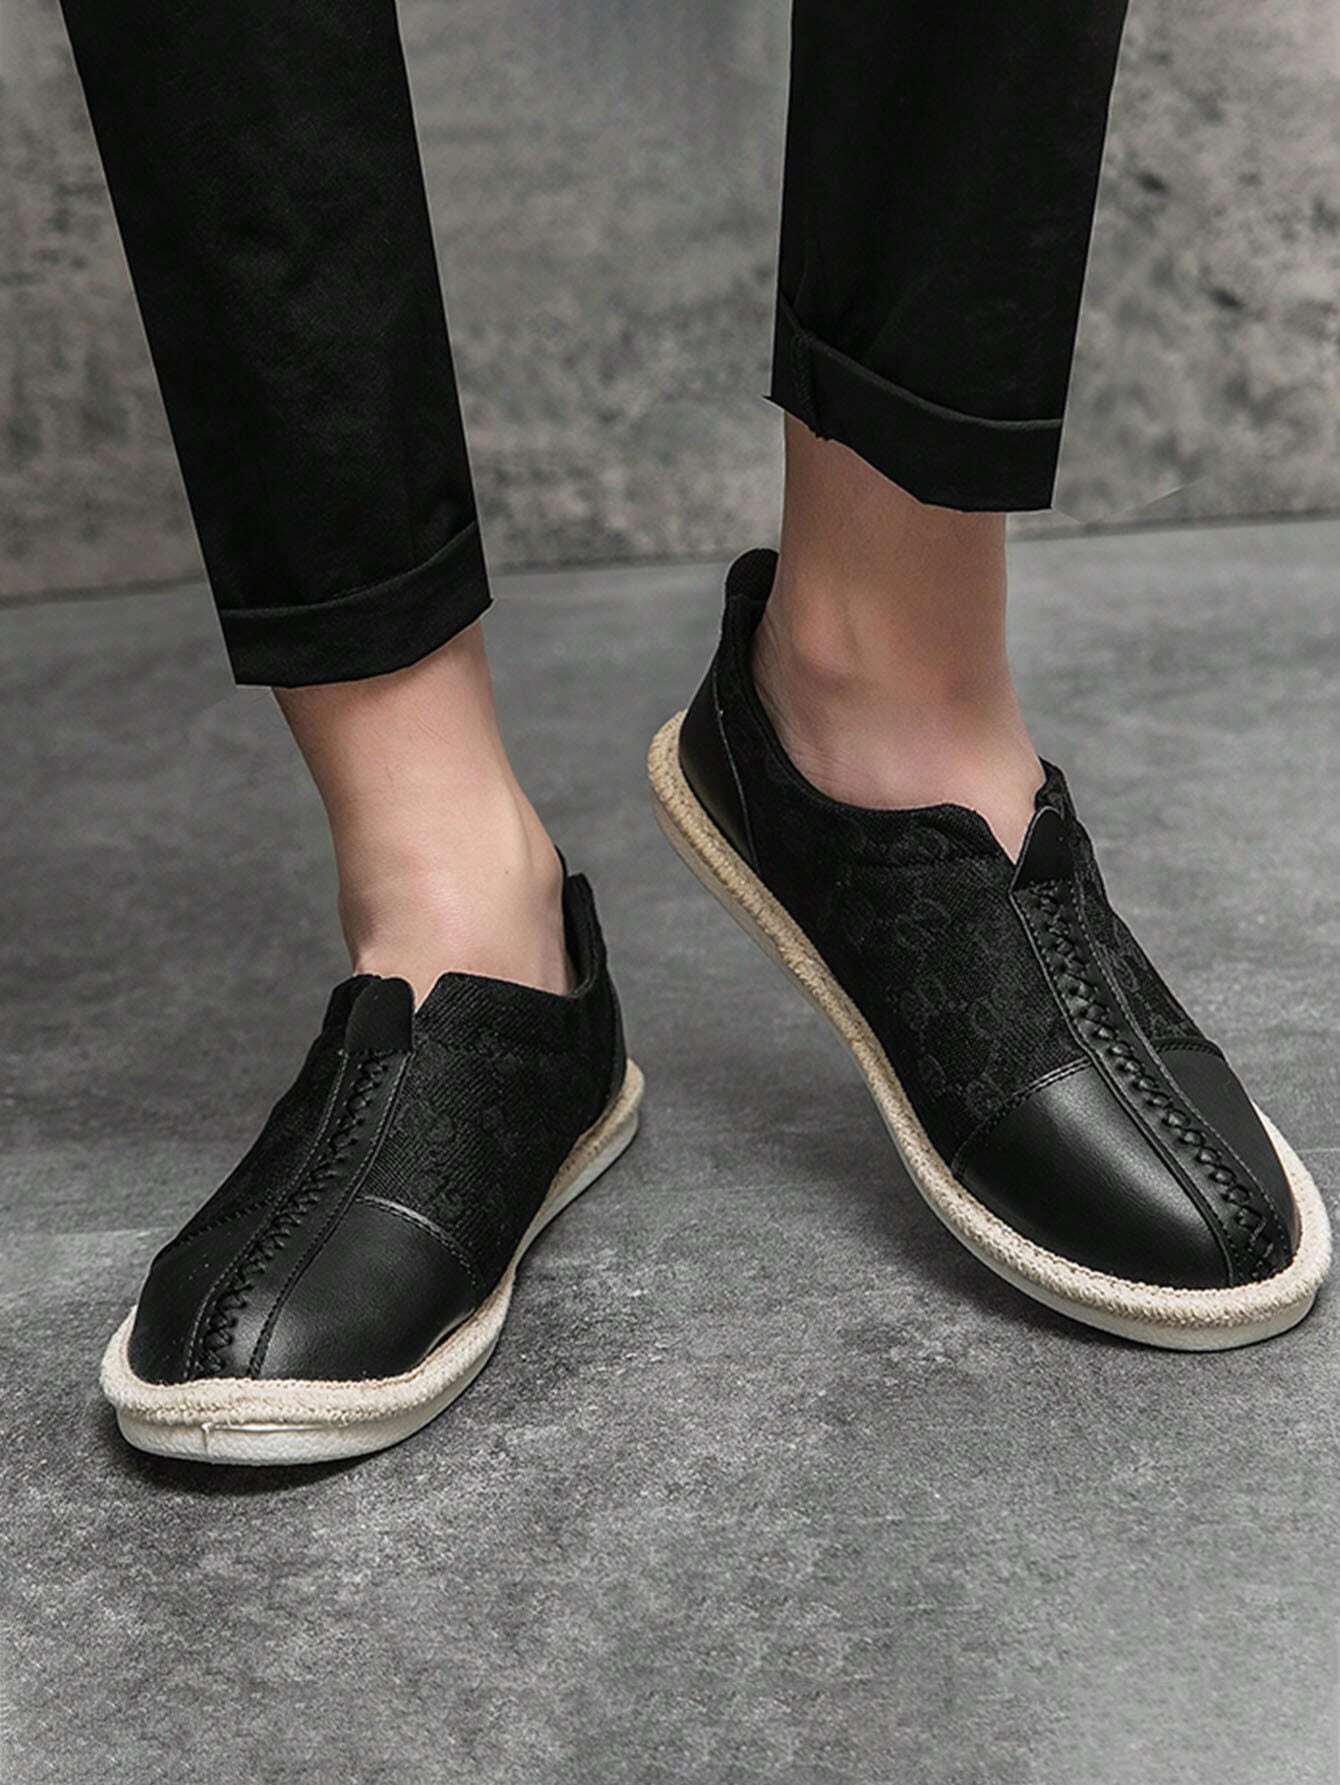 Men Stitch Detail Letter Pattern Loafers, Vacation Black Canvas Espadrille Loafers